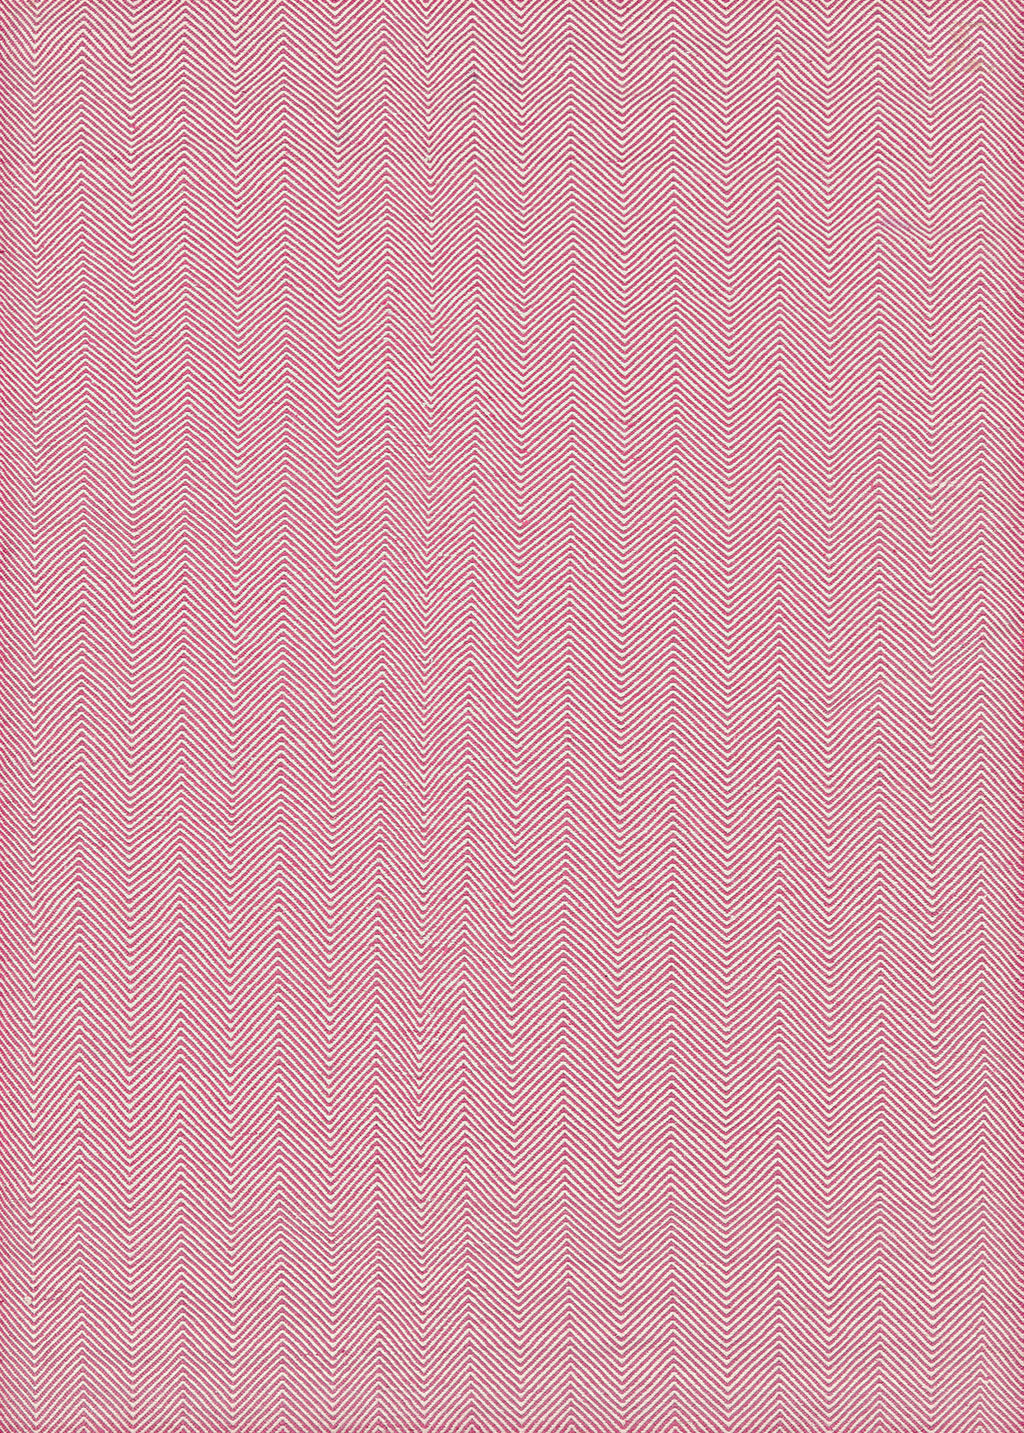 Couristan Cottages Bungalow Pink Area Rug